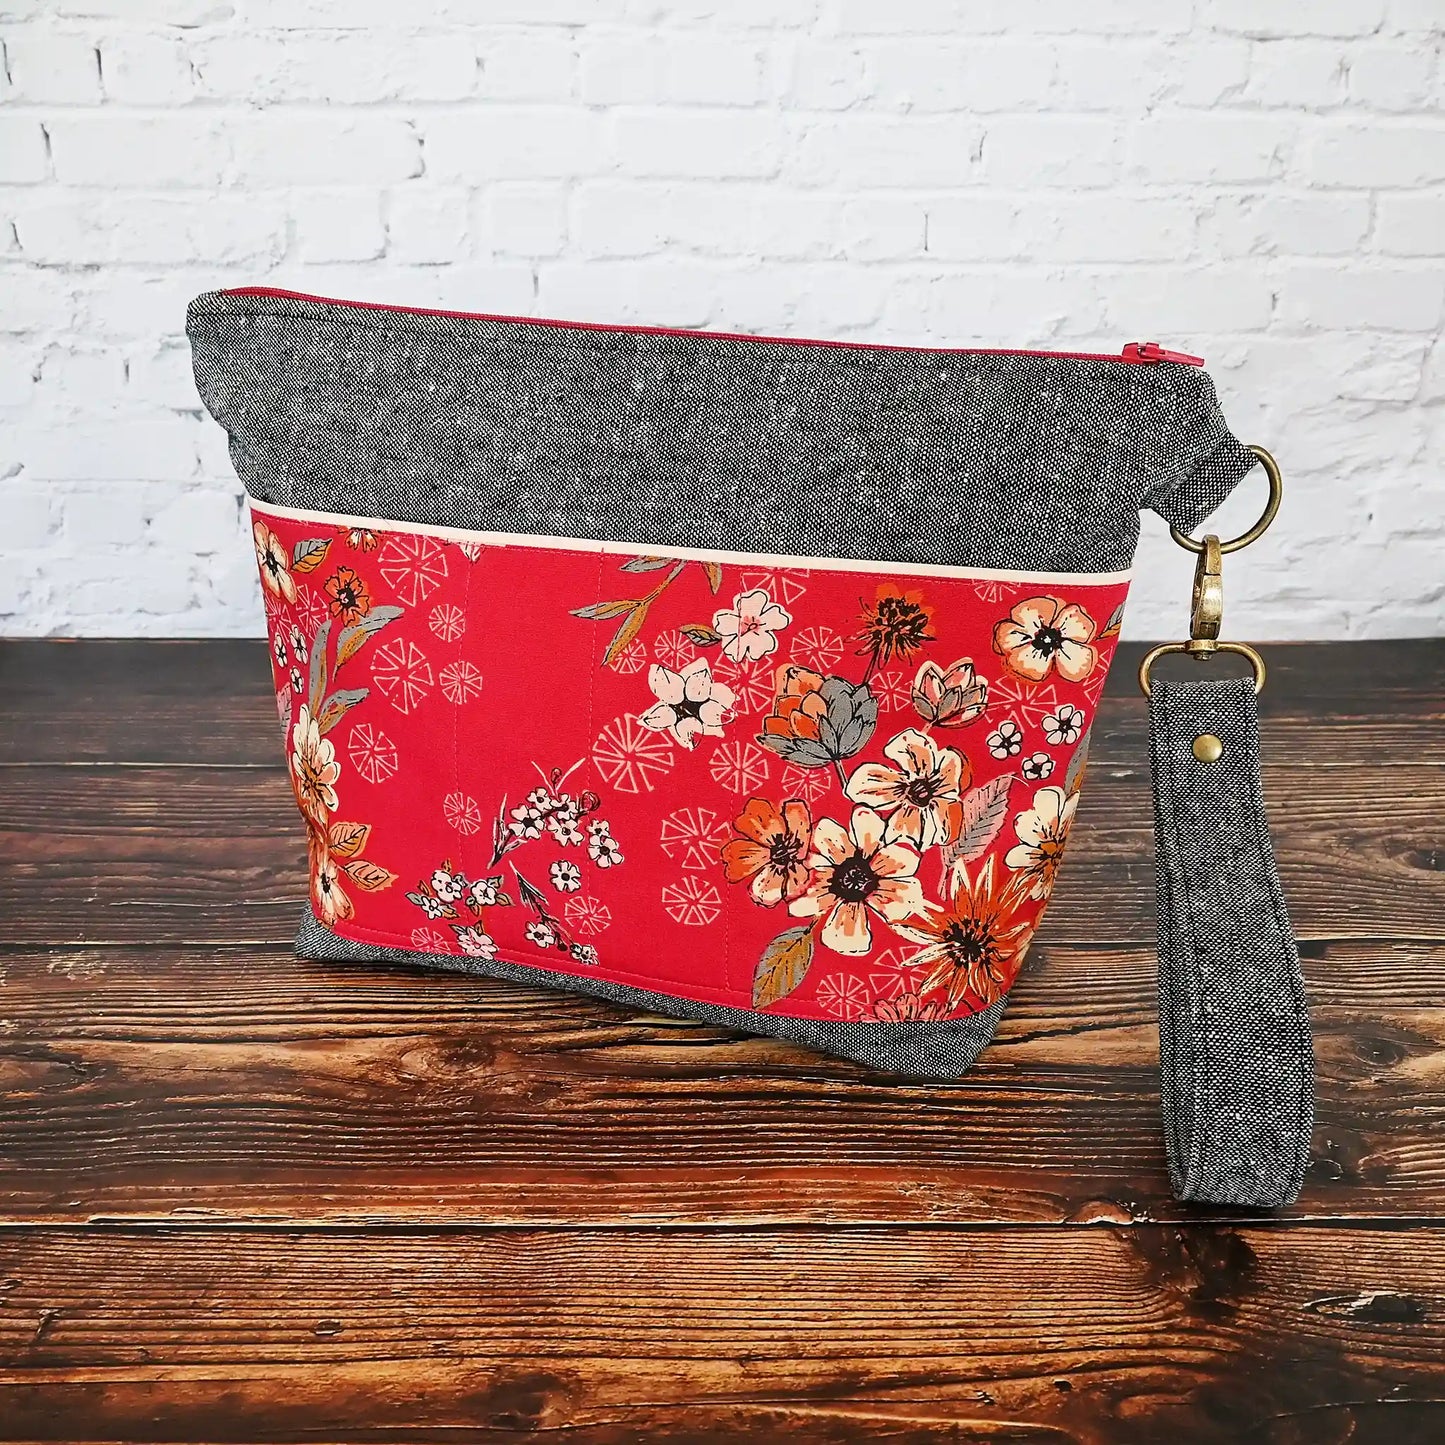 Beautiful grey linen project bag with red floral exterior pockets in  premium Art Gallery cotton.  Comes with a removal wrist strap. Made in Nova Scotia Canada by Yellow Petal Handmade.